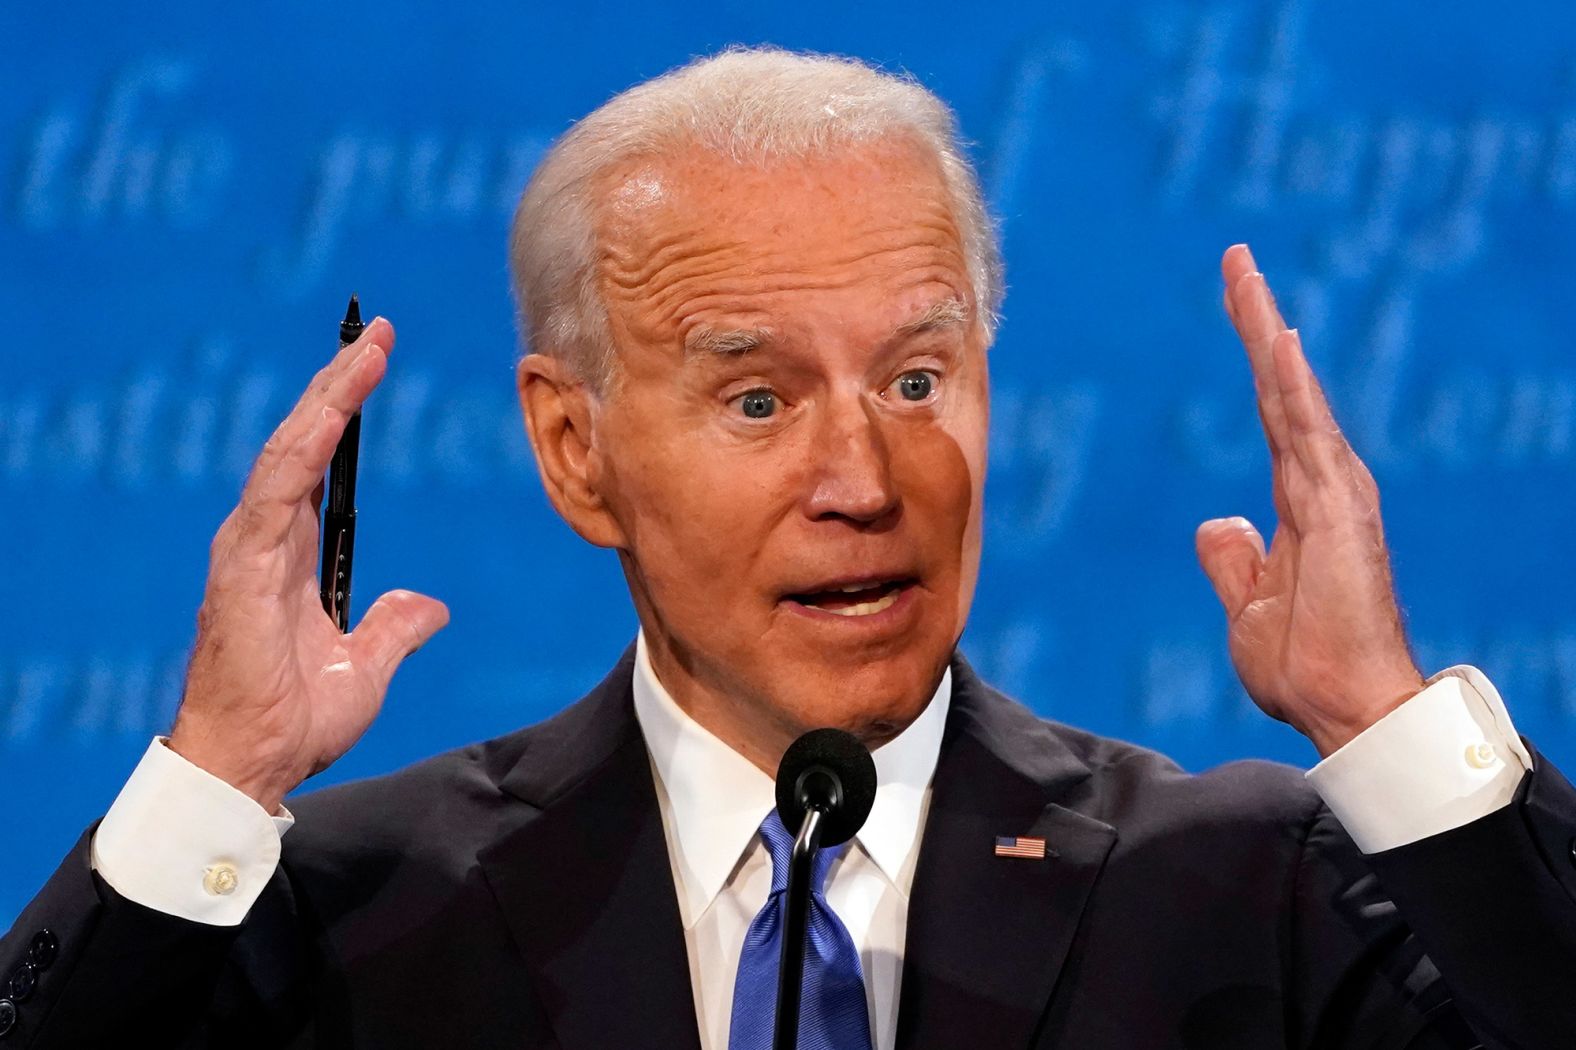 Biden answers a question during the debate. Biden currently has a larger lead in national polls than Hillary Clinton did at this point in 2016. <a href="index.php?page=&url=https%3A%2F%2Fwww.cnn.com%2Felection%2F2020%2Fpresidential-polls" target="_blank">In CNN's Poll of Polls,</a> Biden is leading Trump by 10 points nationally and he is also showing considerable strength in the key battleground states of Pennsylvania, Michigan and Wisconsin where Trump won by narrow margins in 2016.